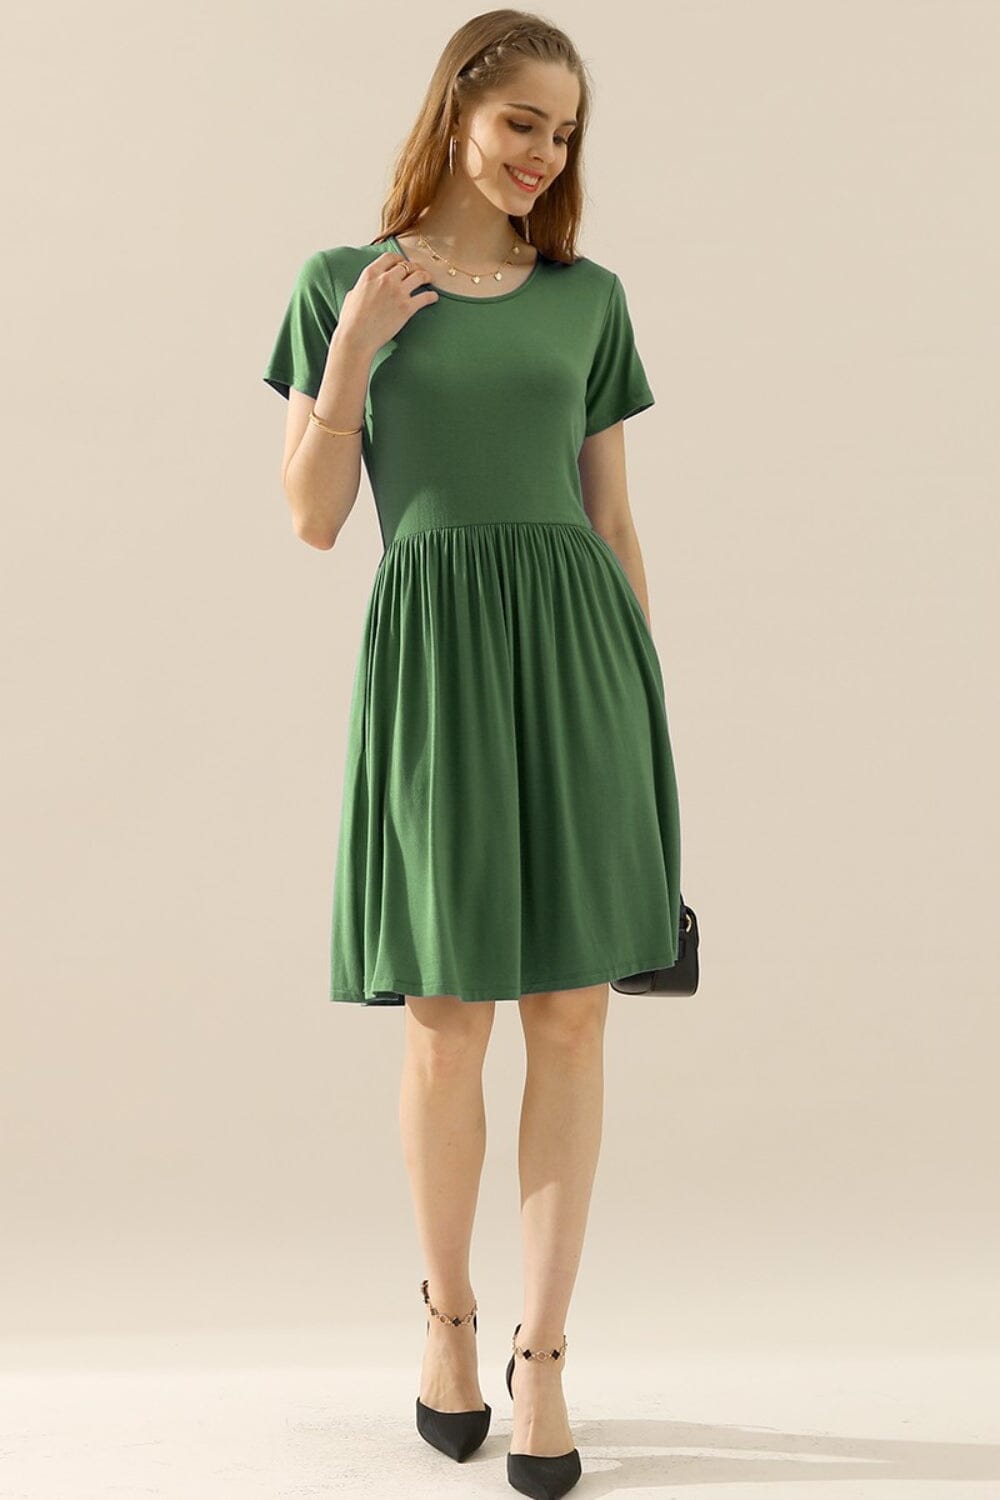 Ninexis Round Neck Ruched Dress with Pockets Dresses jehouze 